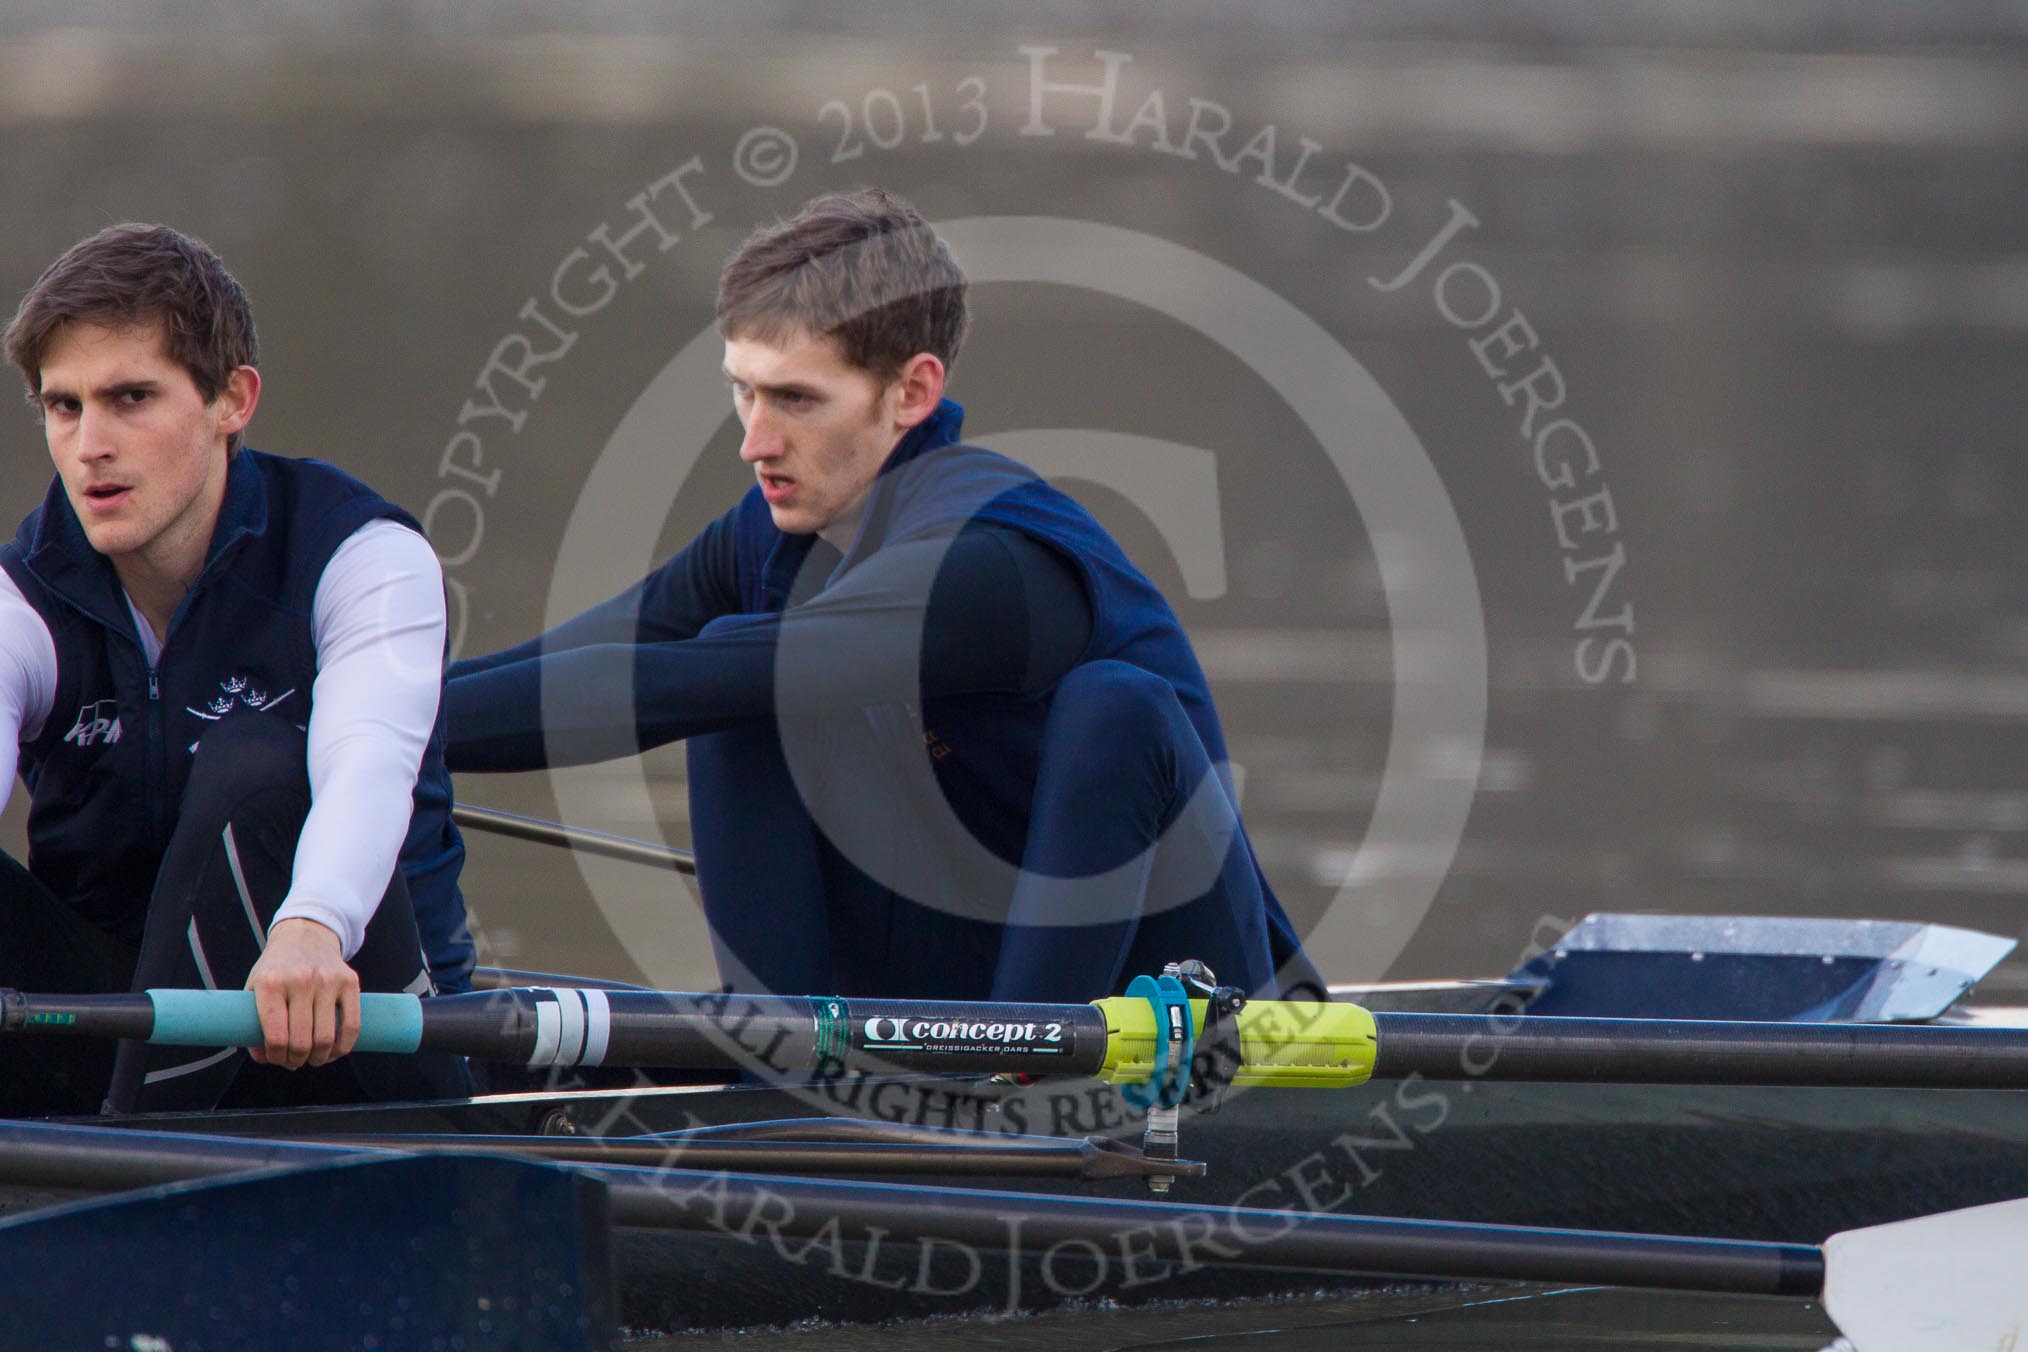 The Boat Race season 2013 - CUWBC training: The OULRC boat - 2 seat Benjamin Bronselaer and bow James Kirkbride..
River Thames near Remenham,
Henley-on-Thames,
Oxfordshire,
United Kingdom,
on 19 March 2013 at 16:29, image #136